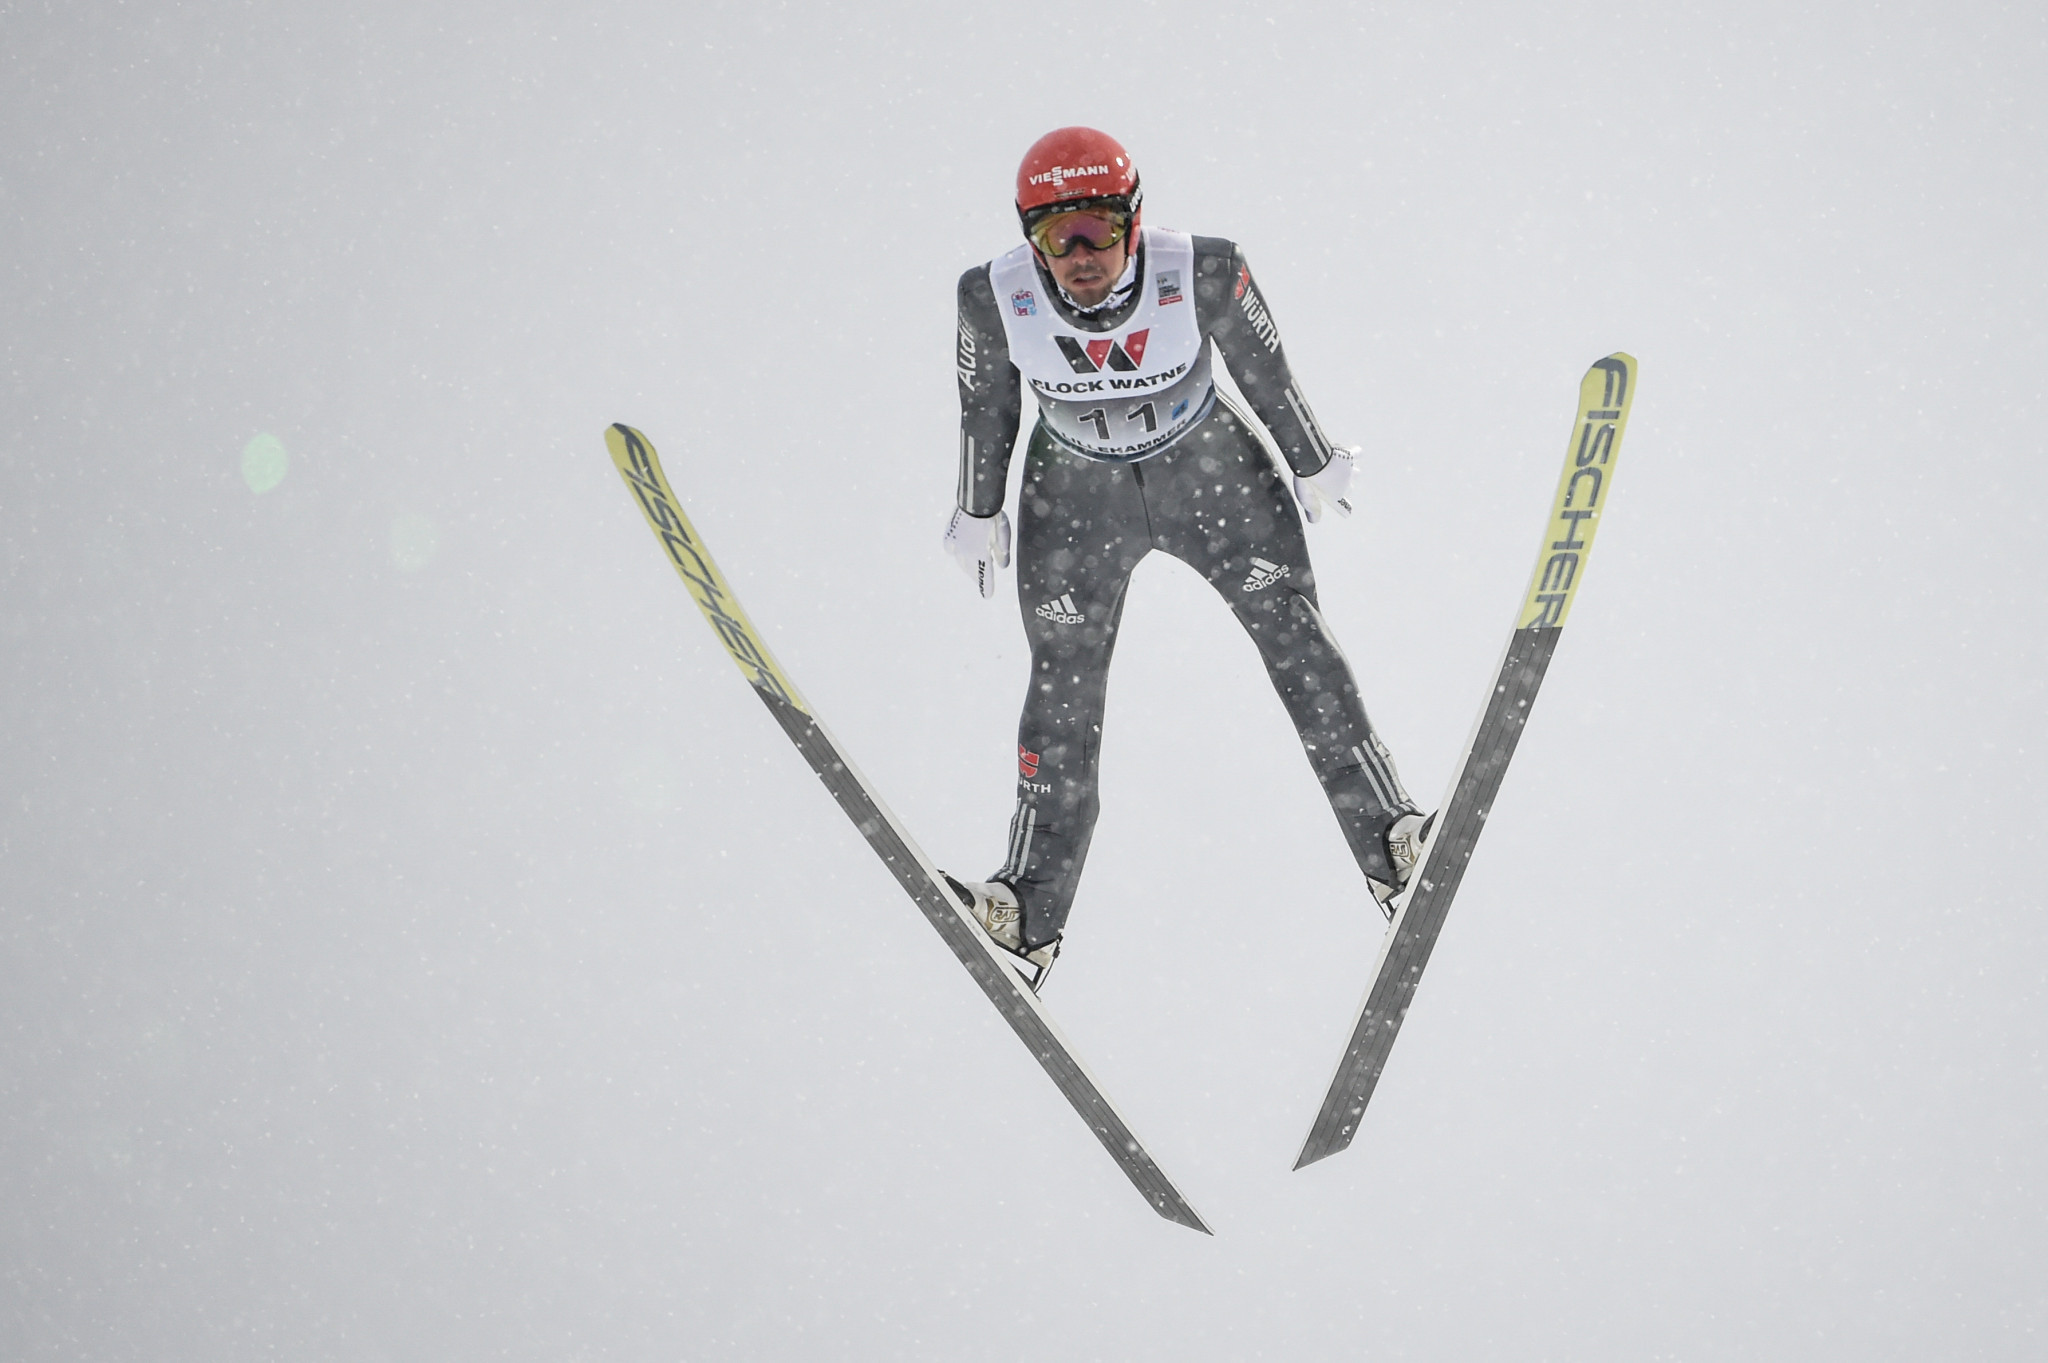 Germany's Johannes Rydzek finished second as he continues his attempt to usurp overall leader Jan Schmid of Norway ©Getty Images